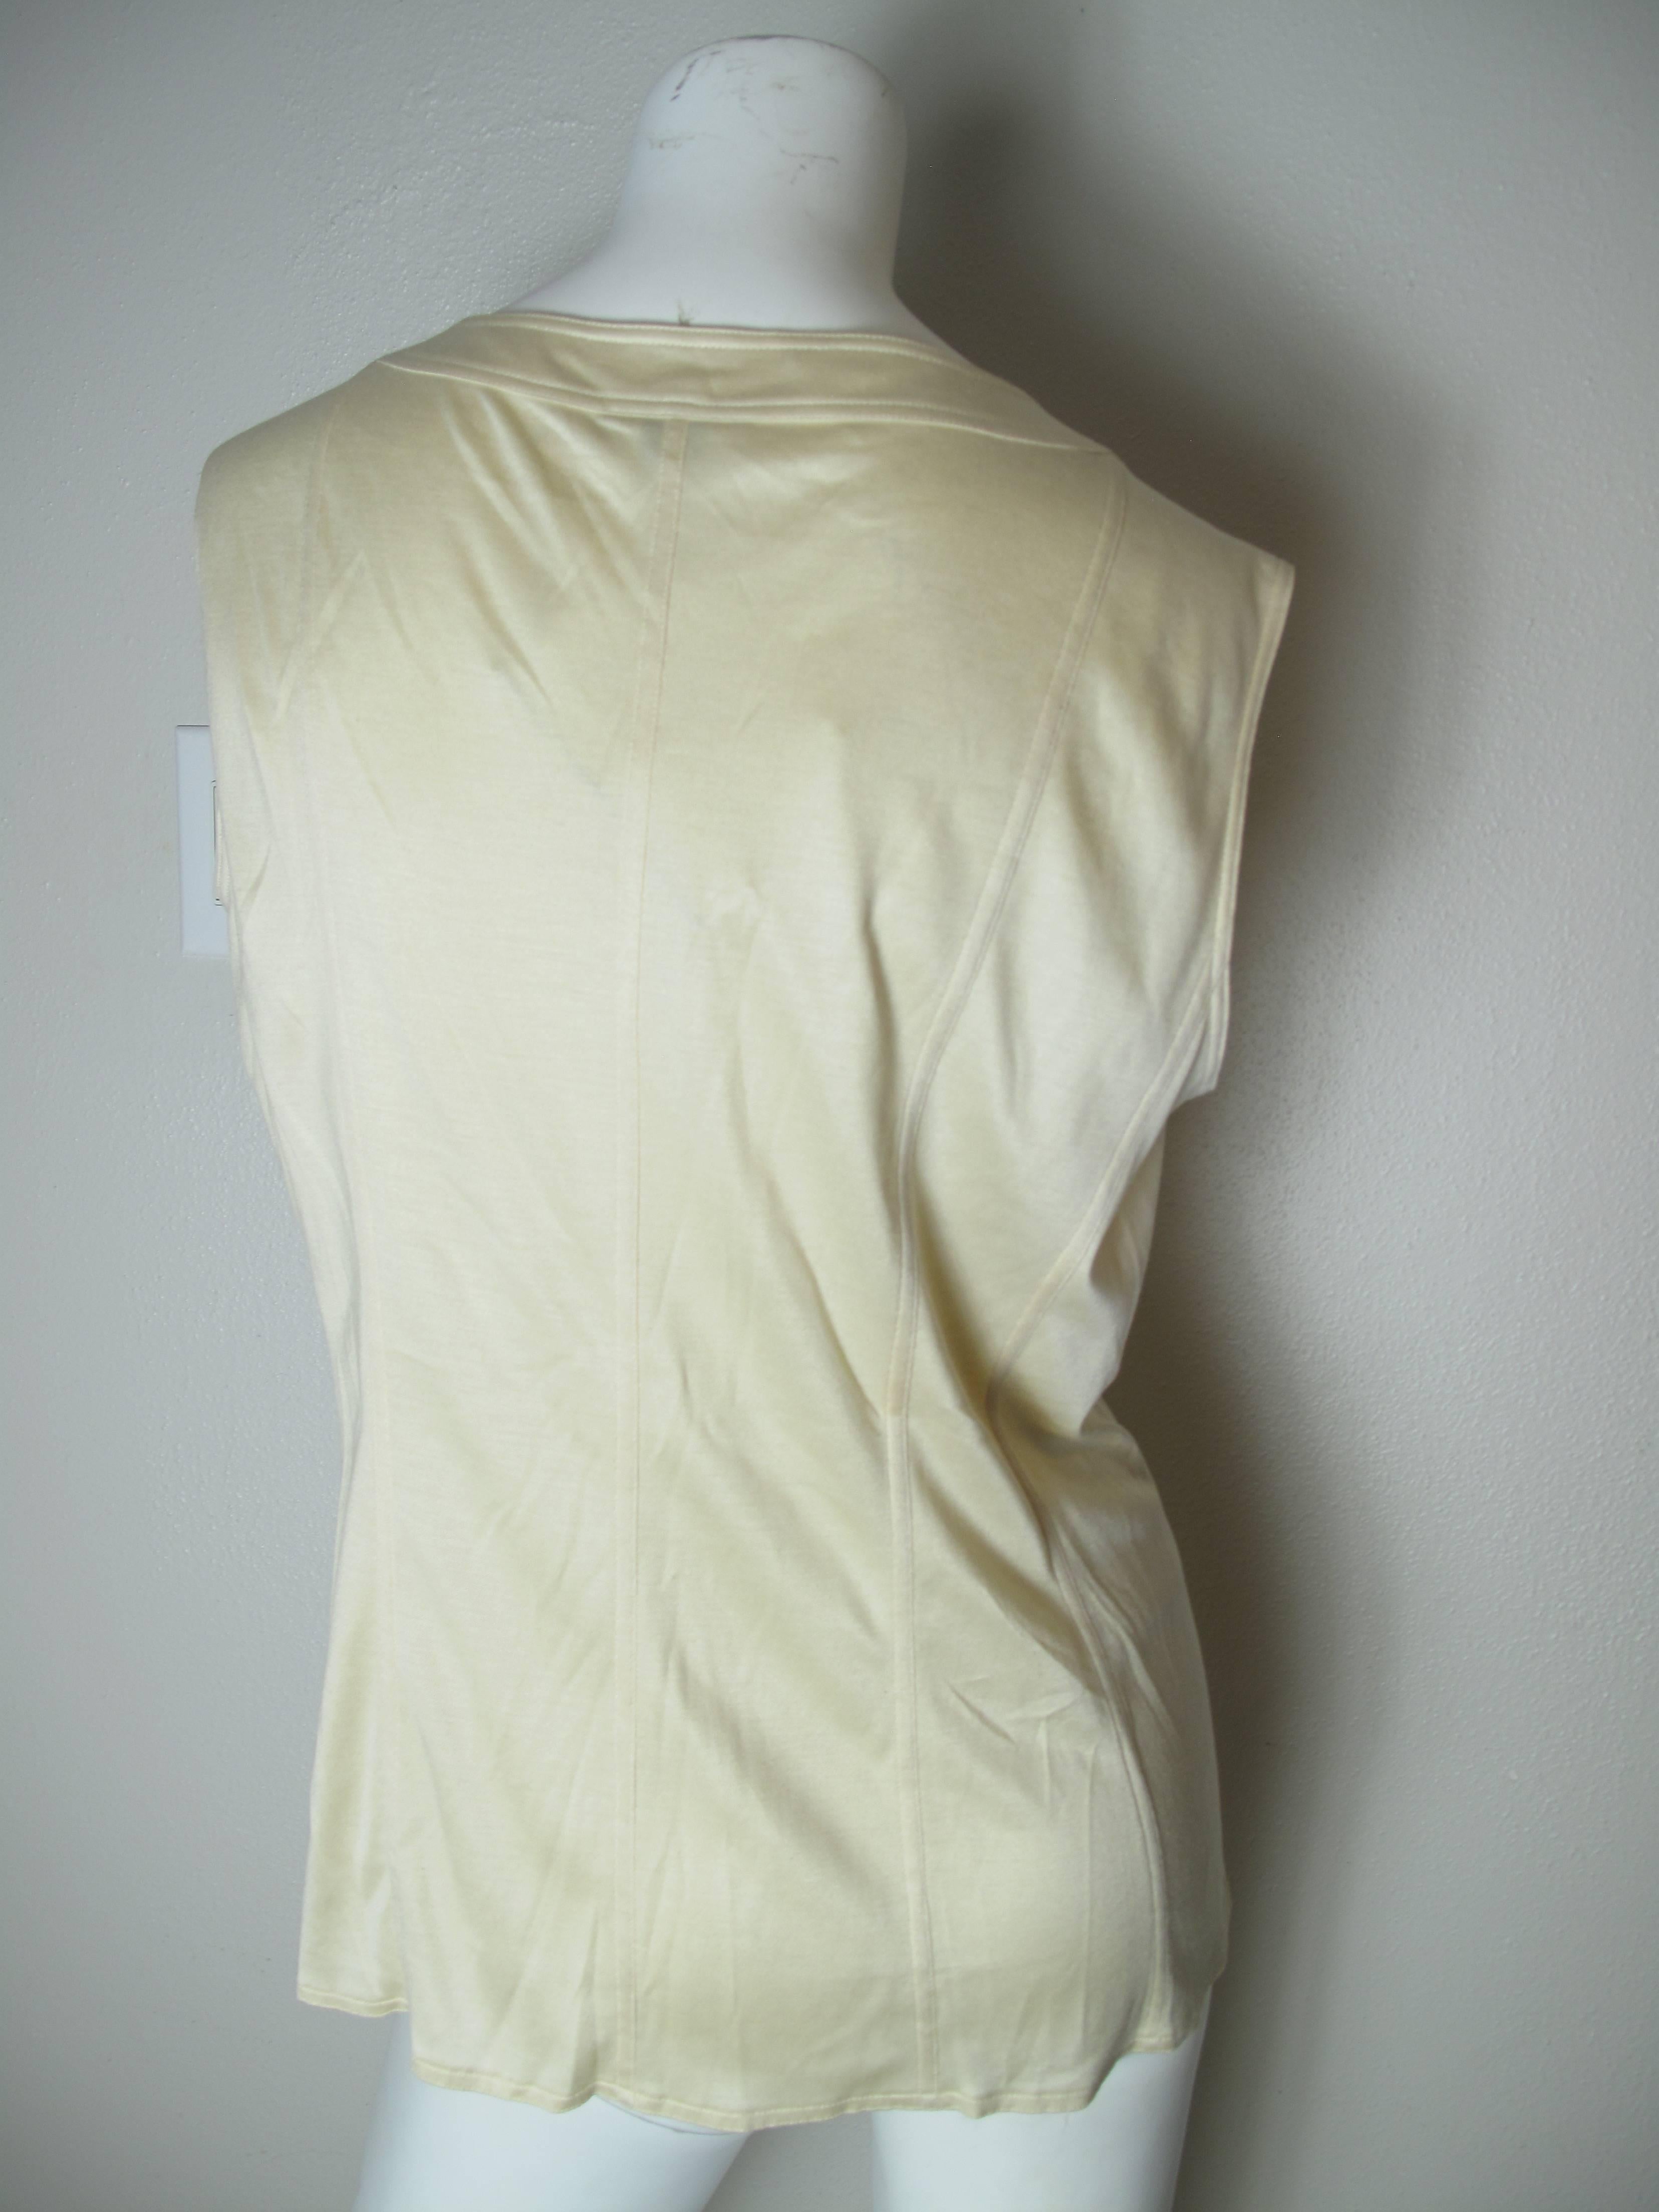 Chanel boutique sleeveless off white top with buttons down front.  Condition: Excellent, never worn.  Size 14/ EU 44

We accept returns for refund, please see our terms.  We offer free ground shipping within the US. Please let us know if you have